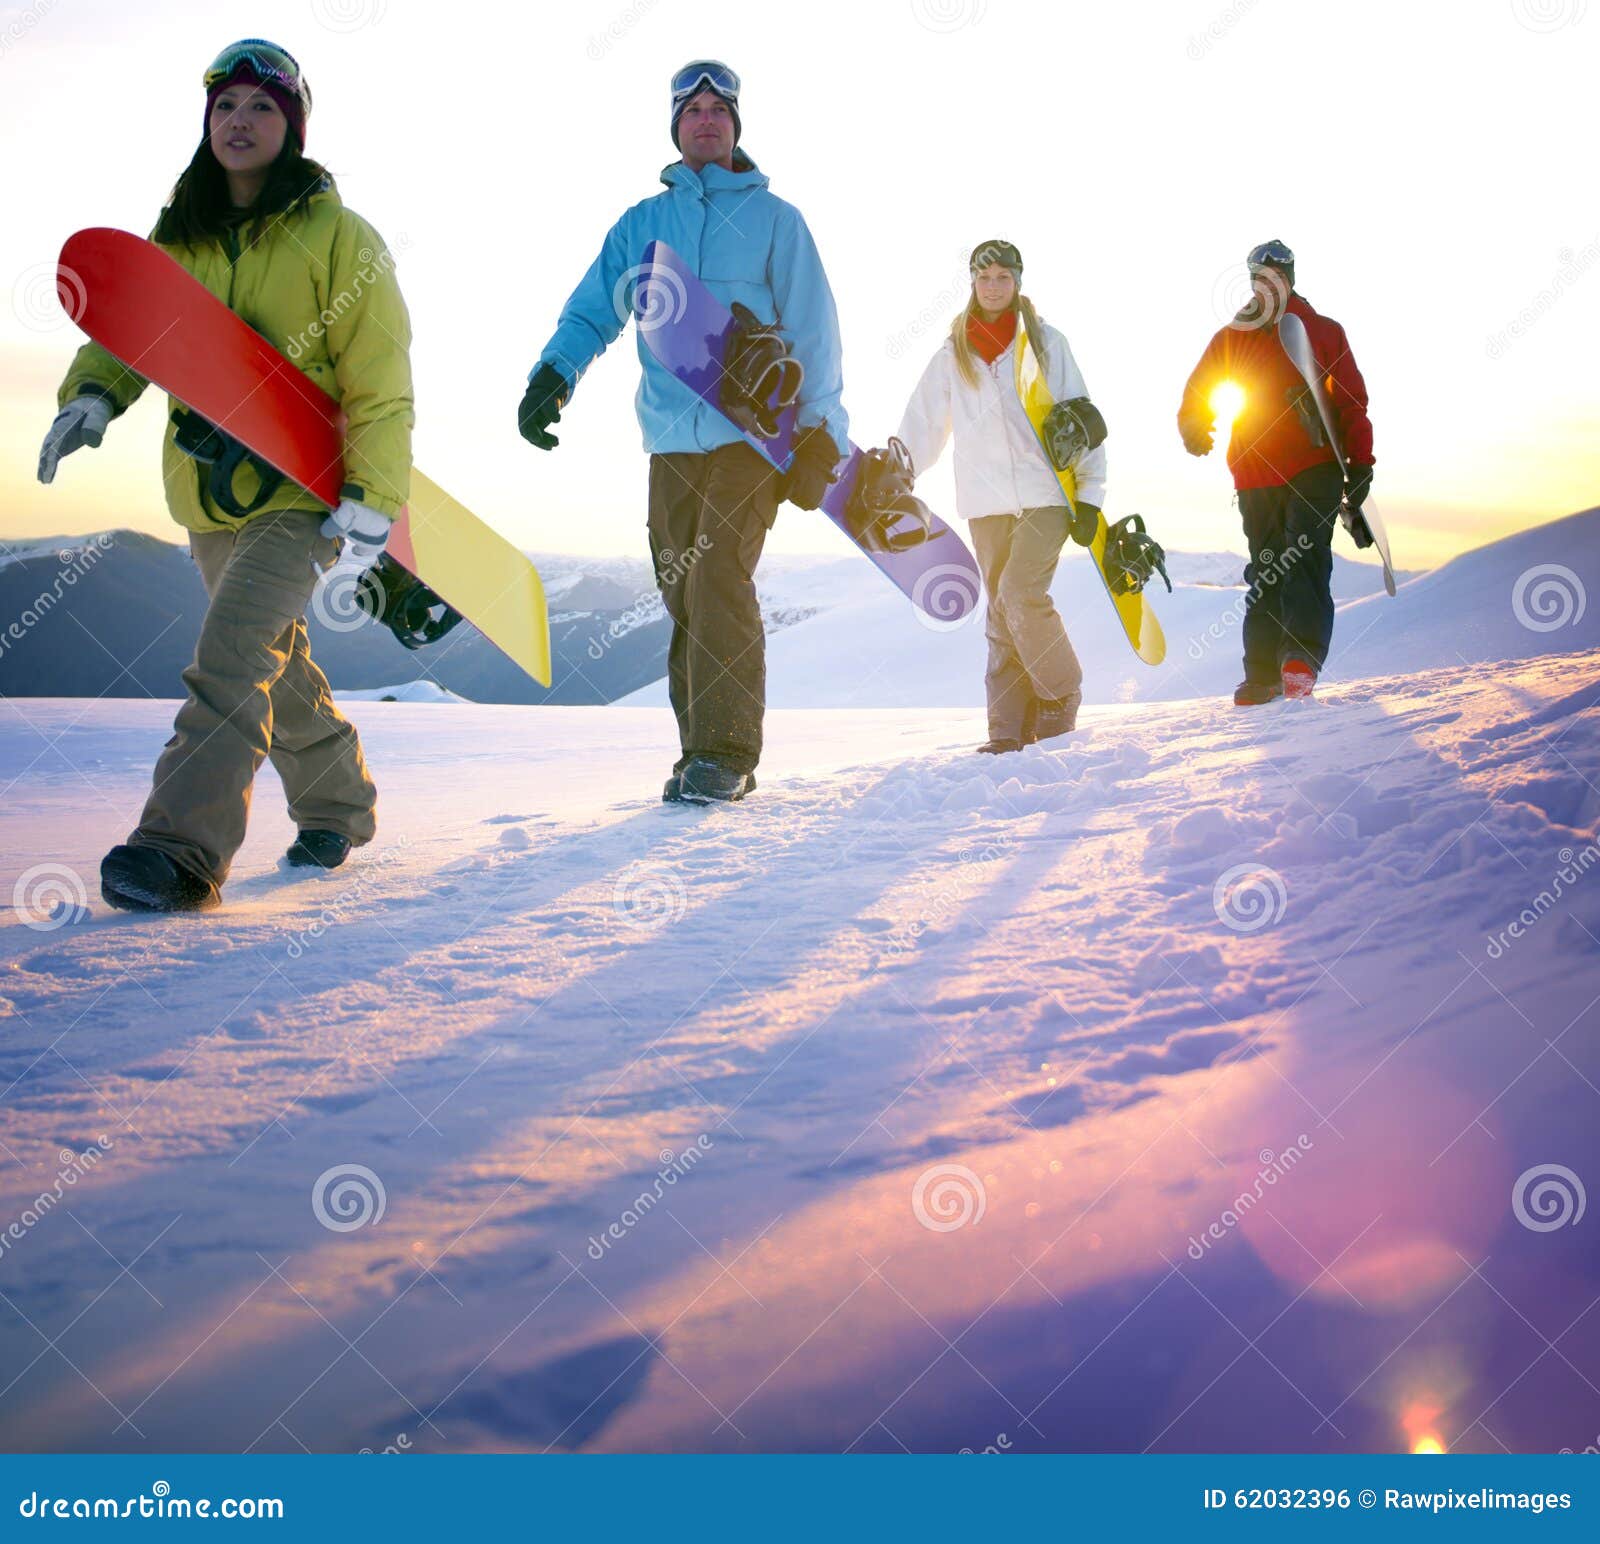 snowboarding people recreation outdoors hobby concept